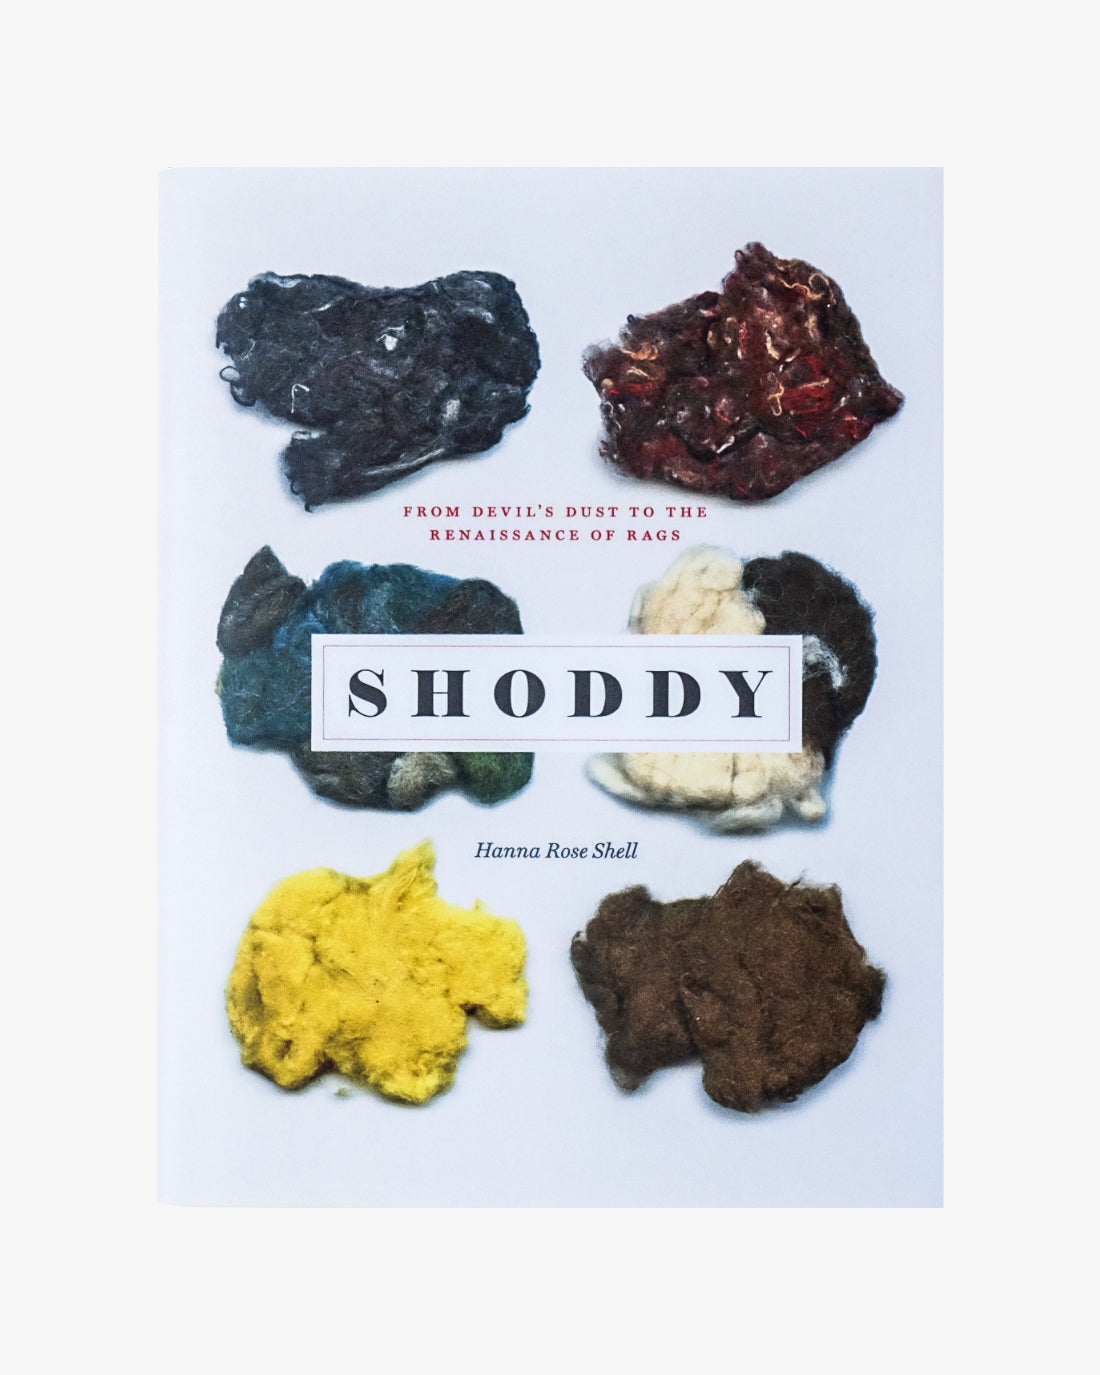 Shoddy: From Devil’s Dust to the Renaissance of Rags by Hanna Rose Shell